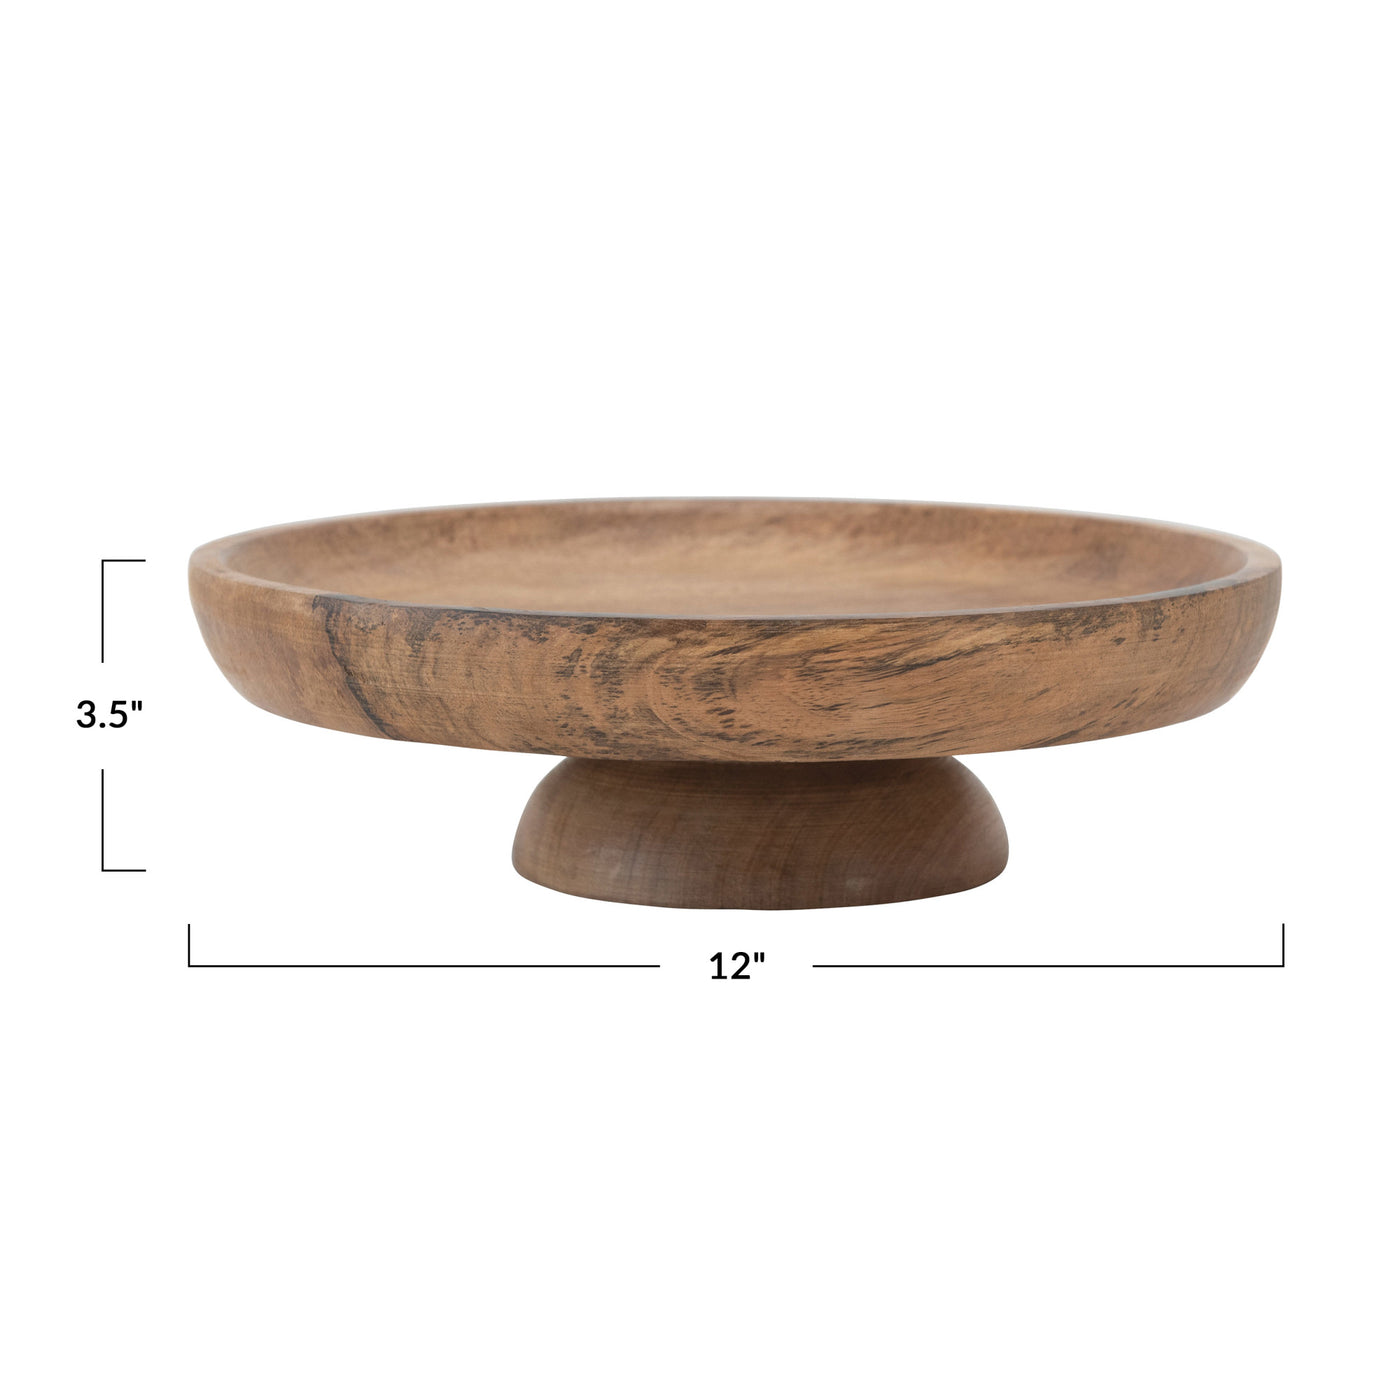 Mango Wood Footed Bowl or Cake Stand